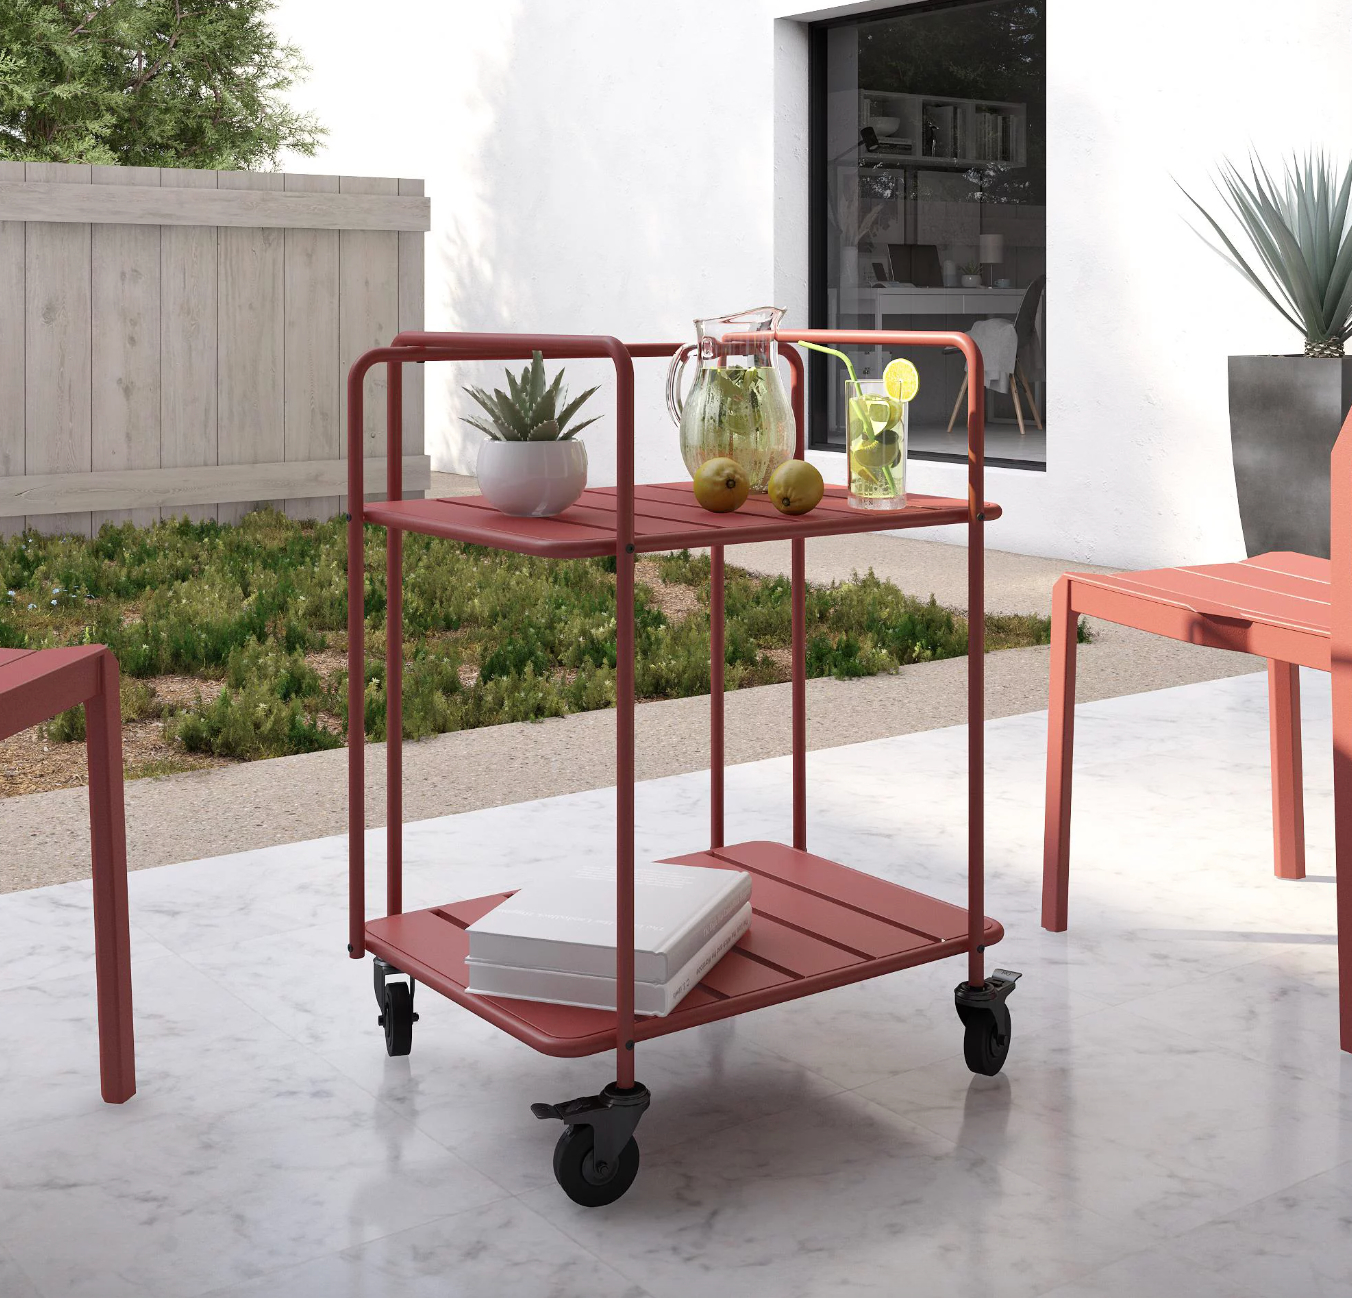 the red steel cart filled with drinks and tchotchkes in a decorated outdoor space